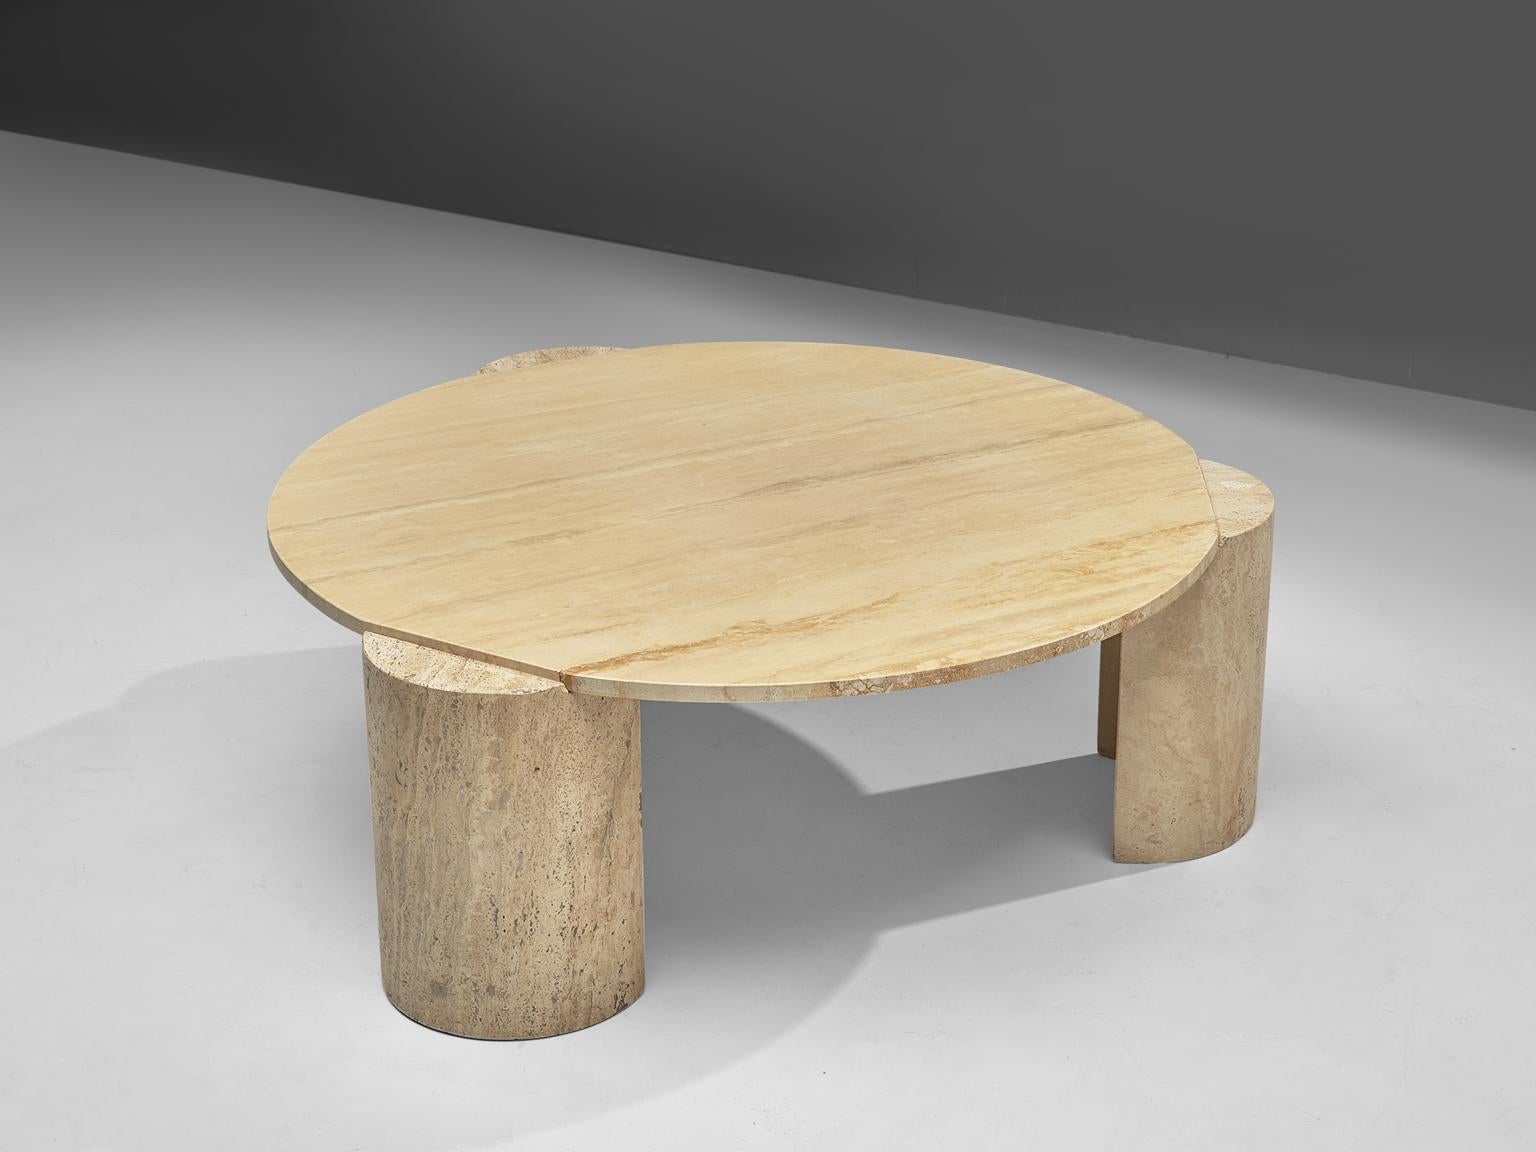 Round coffee table, travertine, Europe, 1970s.

This strong design coffee table features a round table top with a striking base. The three half-mooned shaped legs are placed slightly outwards the table top, which creates a nice visual effect. The